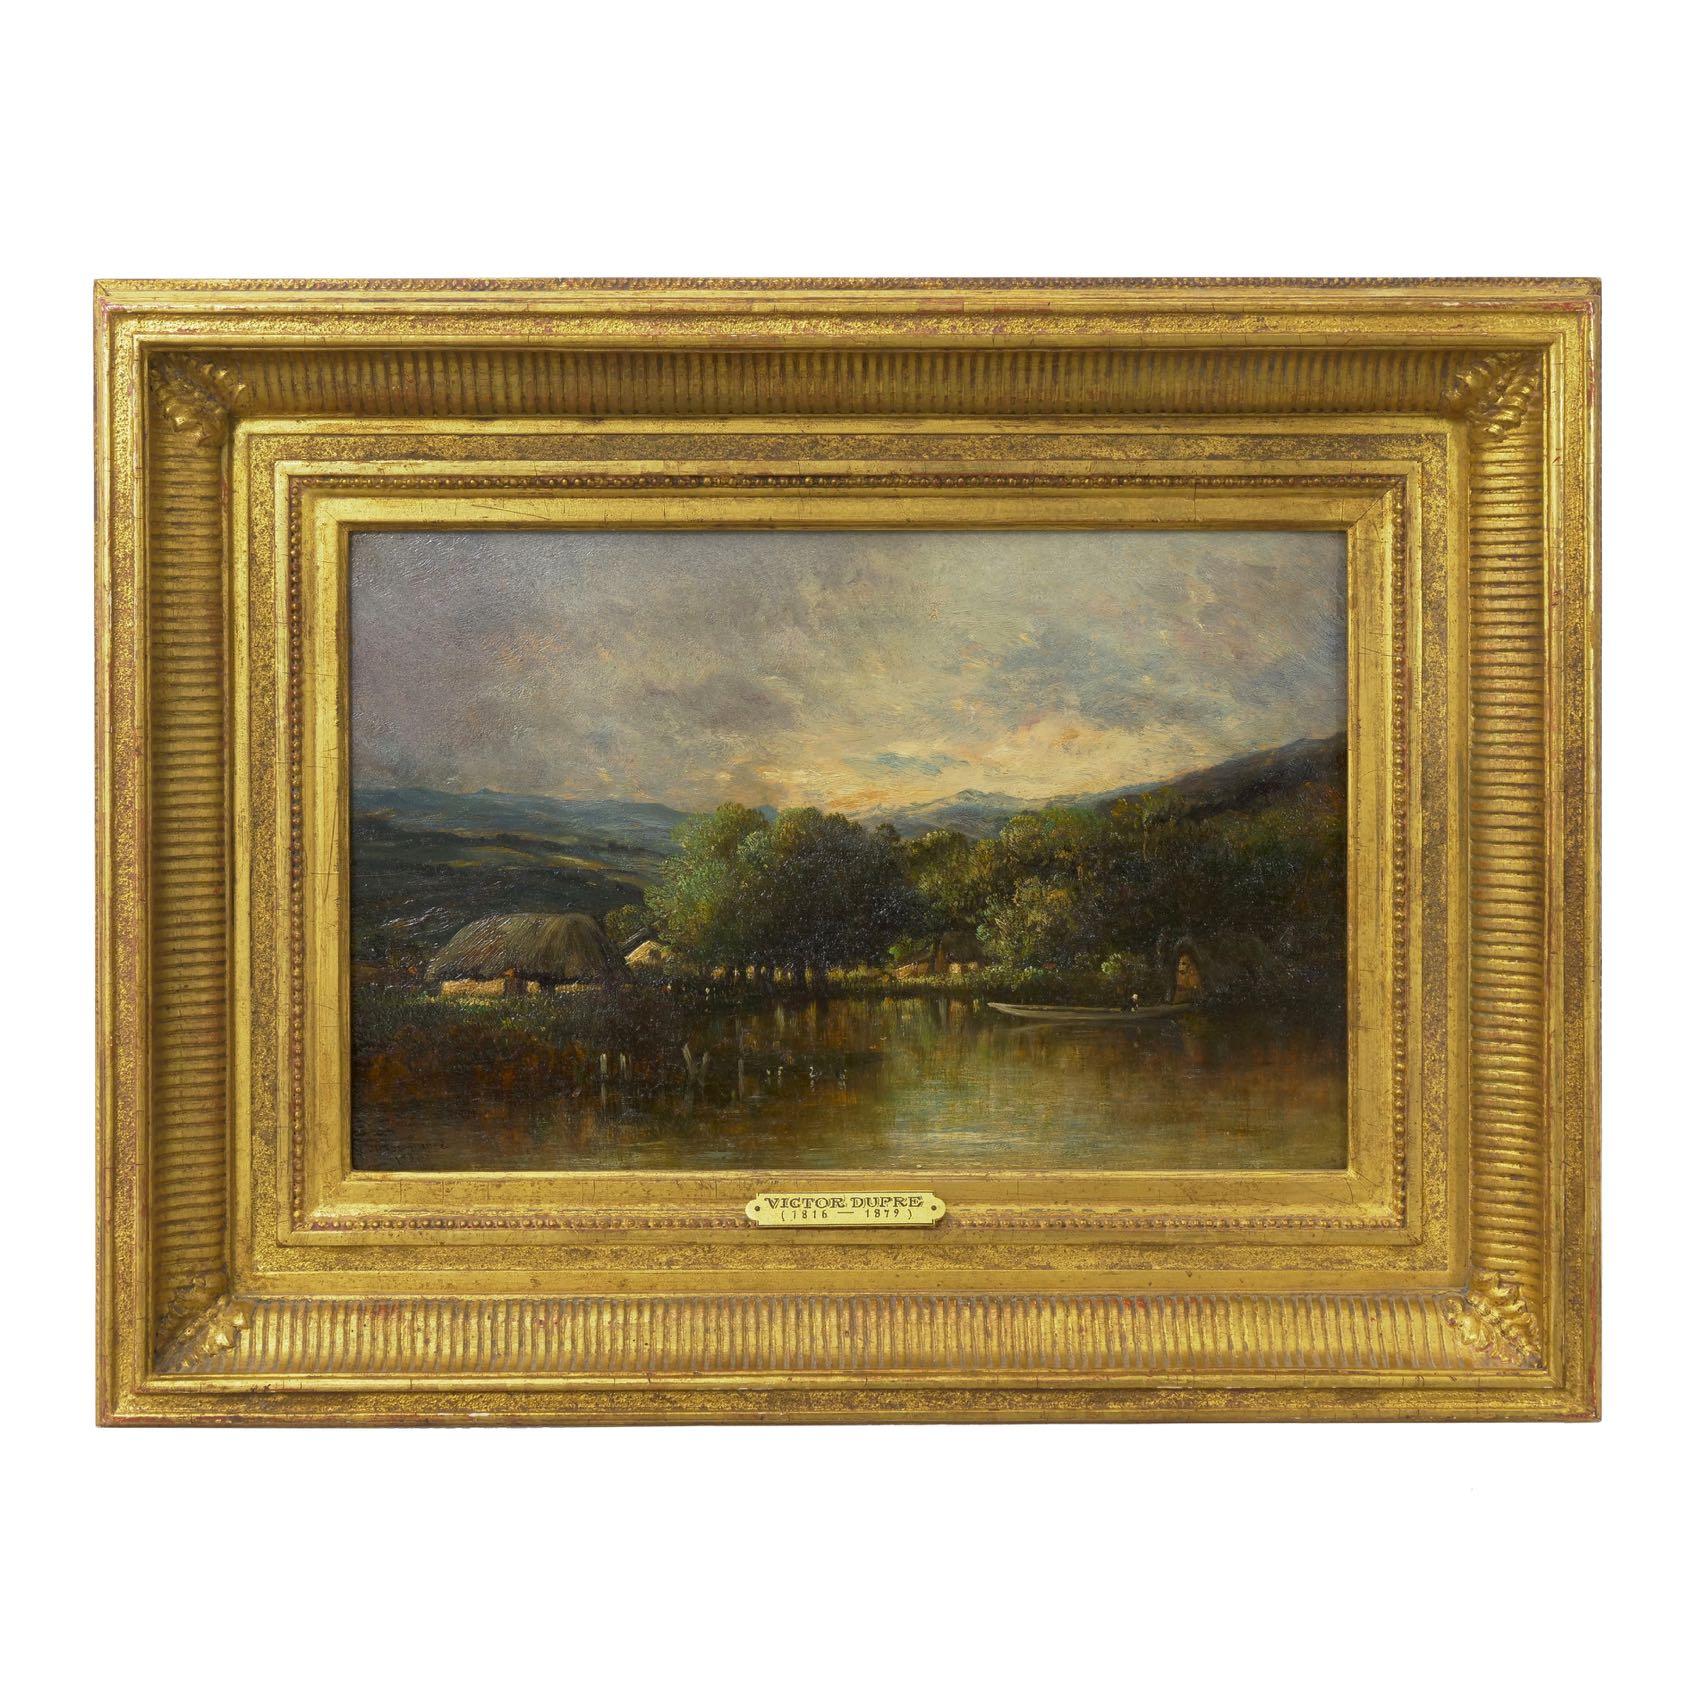 This exquisite little Barbizon painting captures a tranquil hamlet of thatched cottages lining a small body of water where a boater docks in the shallows. The sky is ominous and gloomy, suggestive of weather moving in on the valley as the clouds